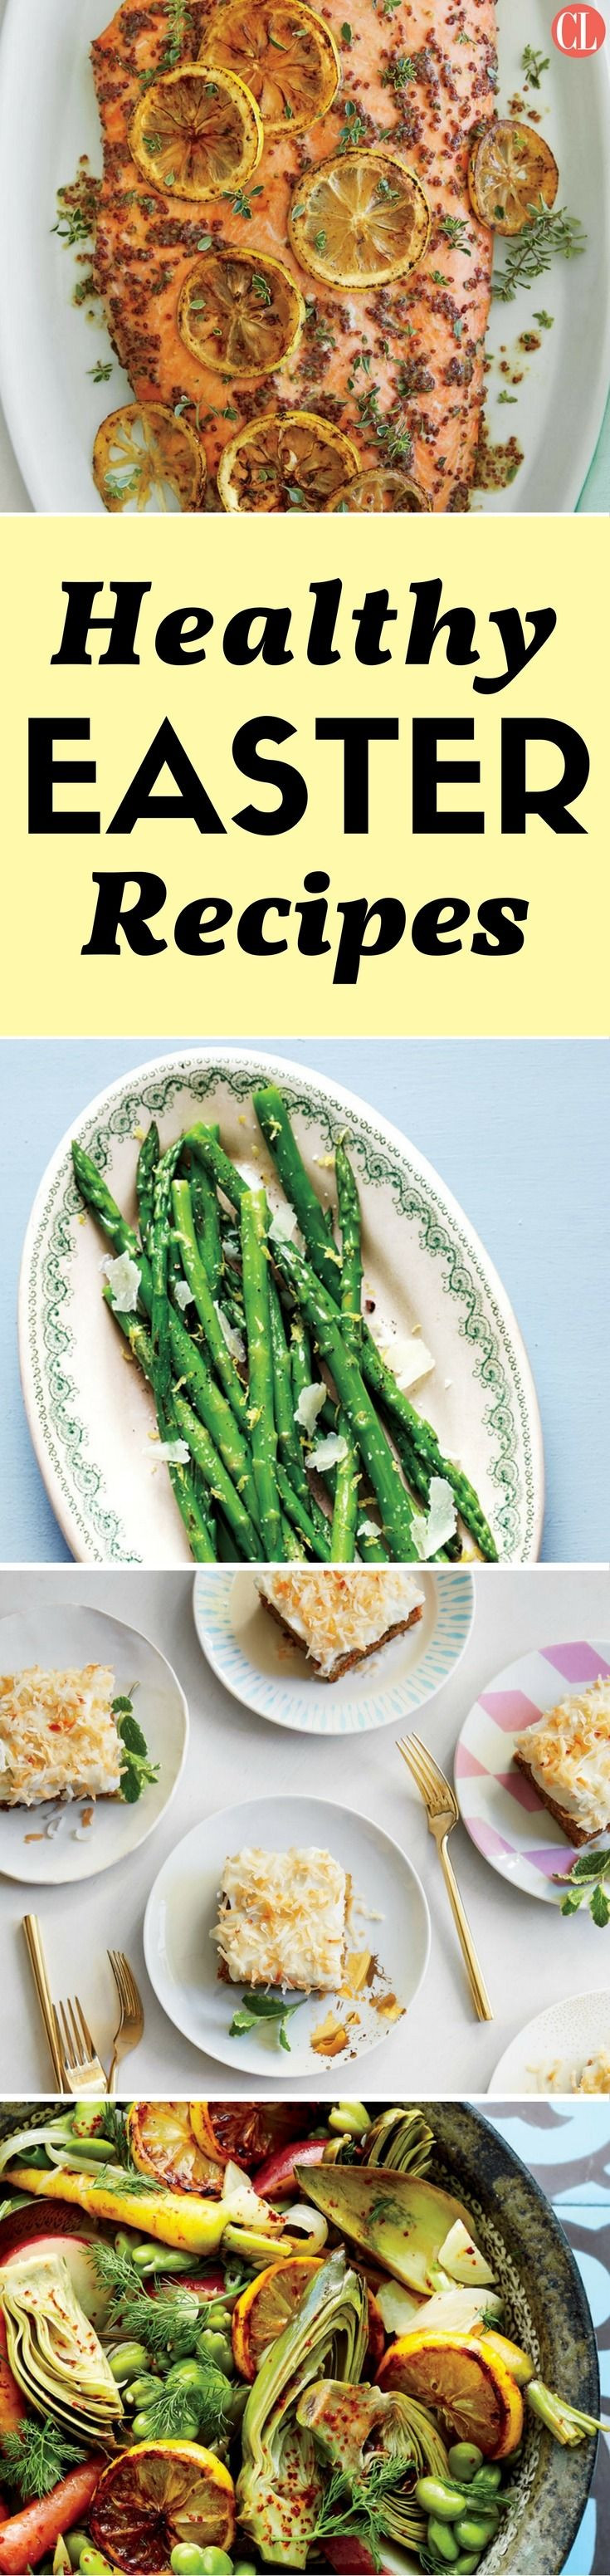 Healthy Easter Dinner Ideas
 262 best images about Easter Recipes on Pinterest